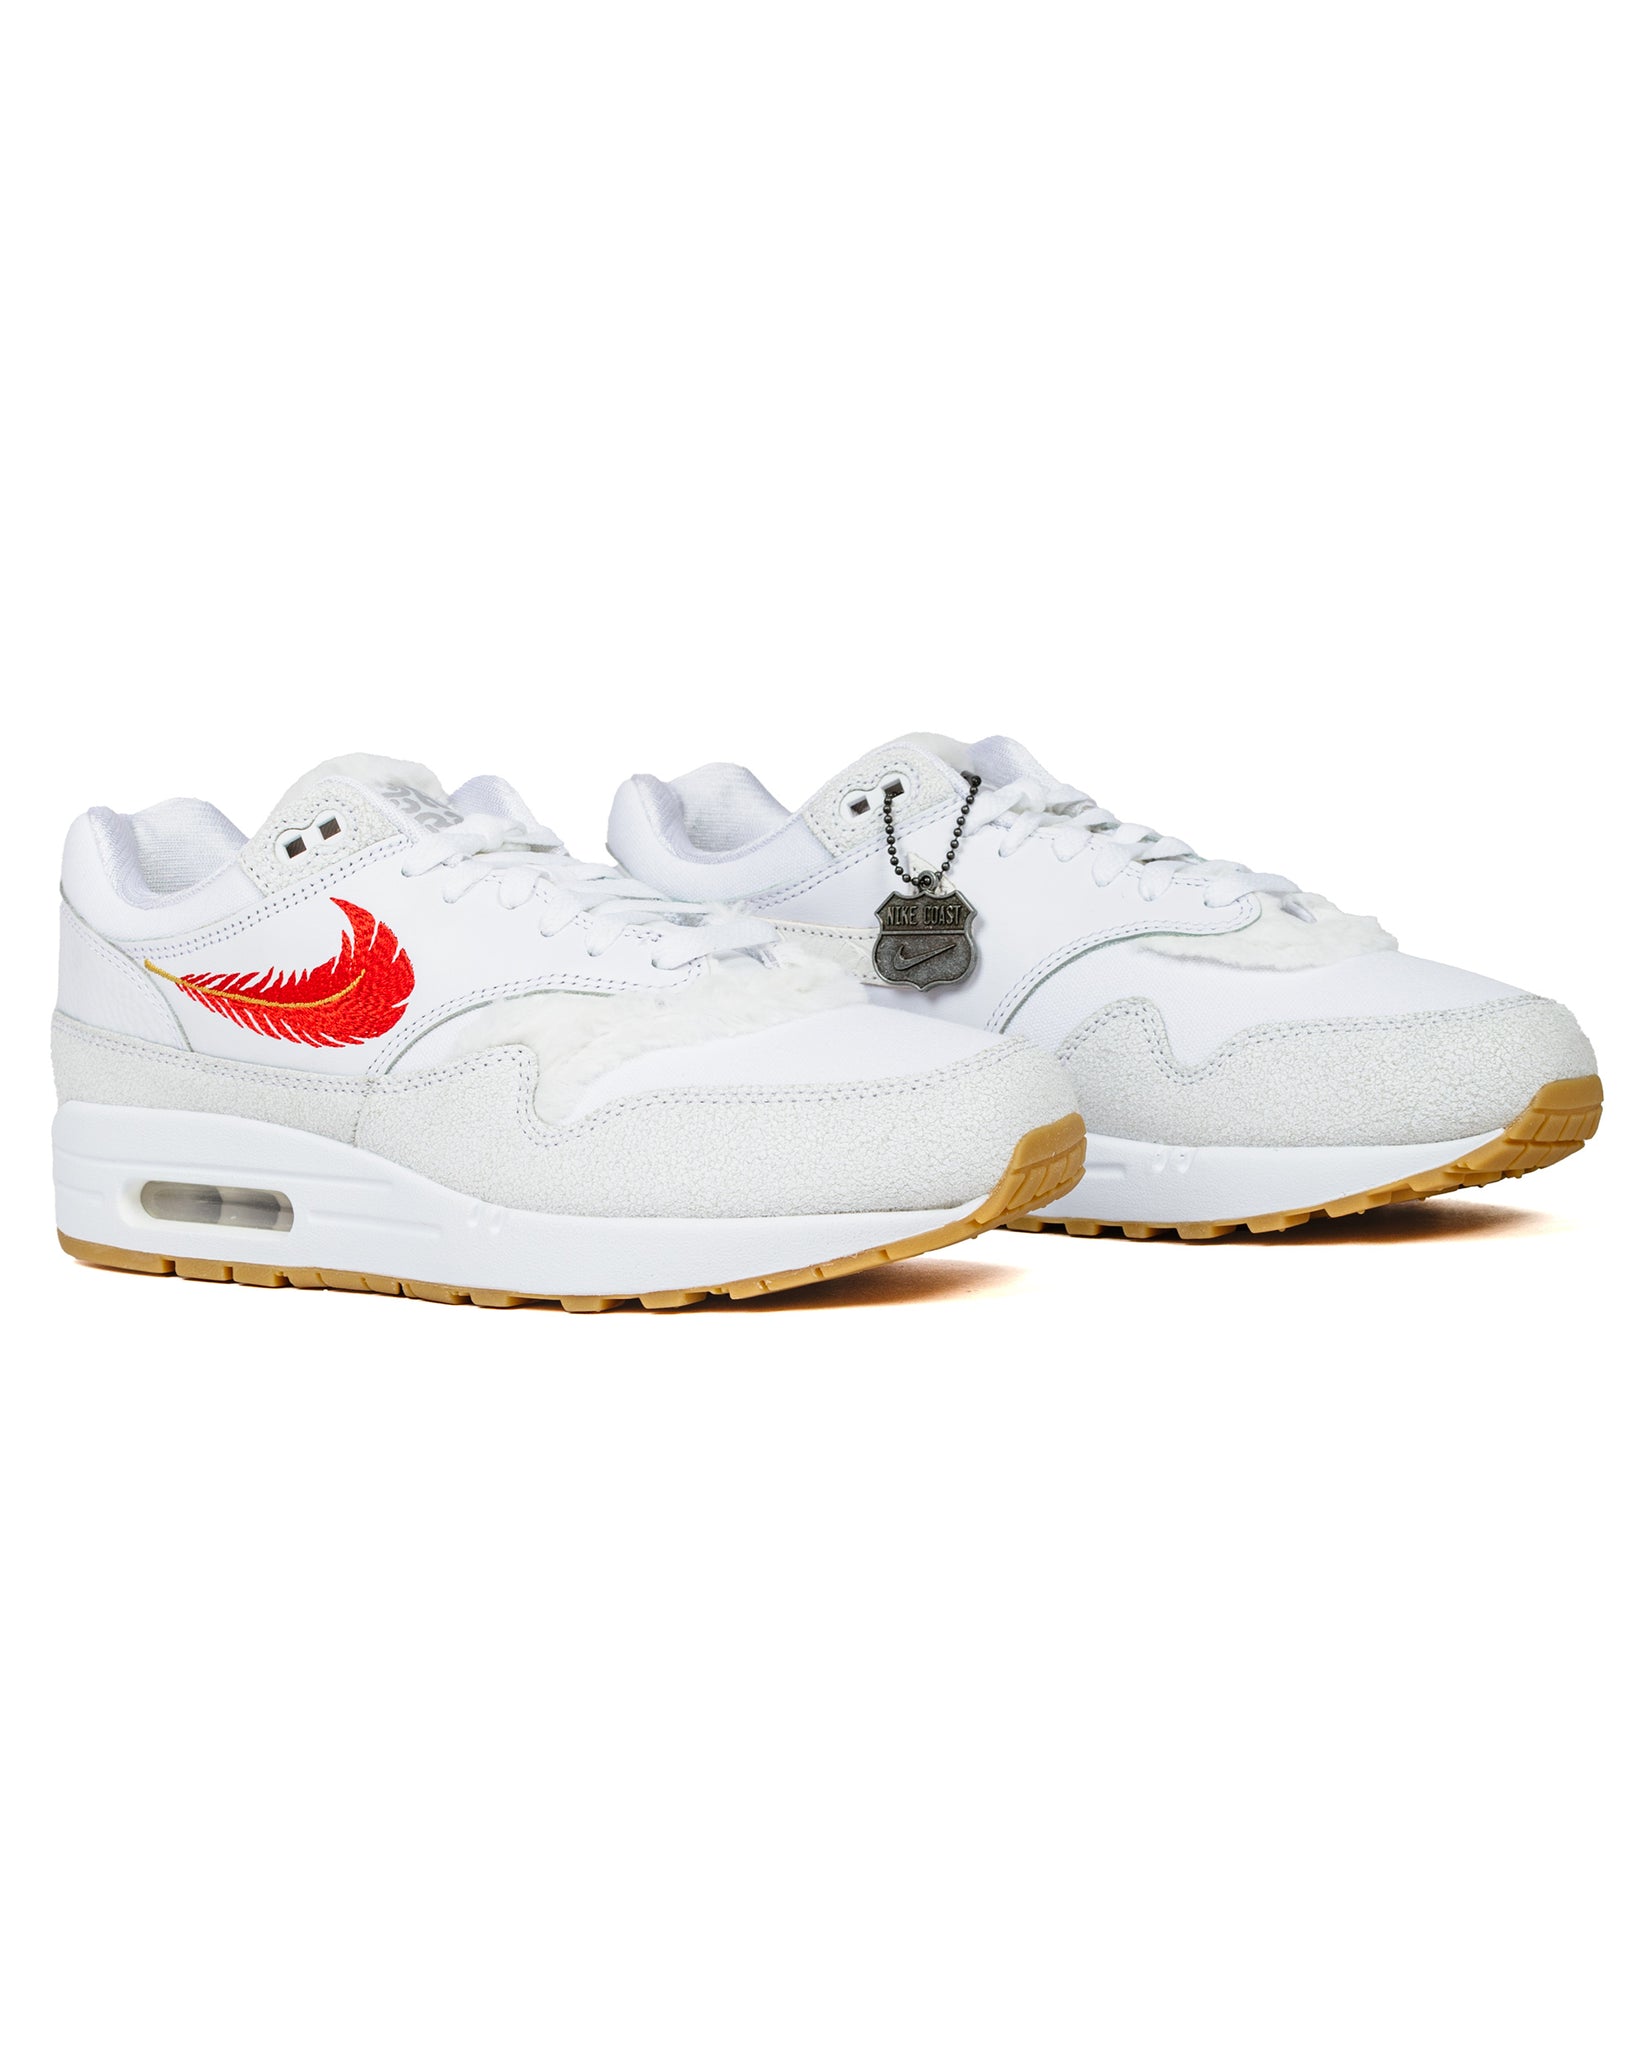 Nike Air Max 1 PRM White/University Red 'The Bay' Side